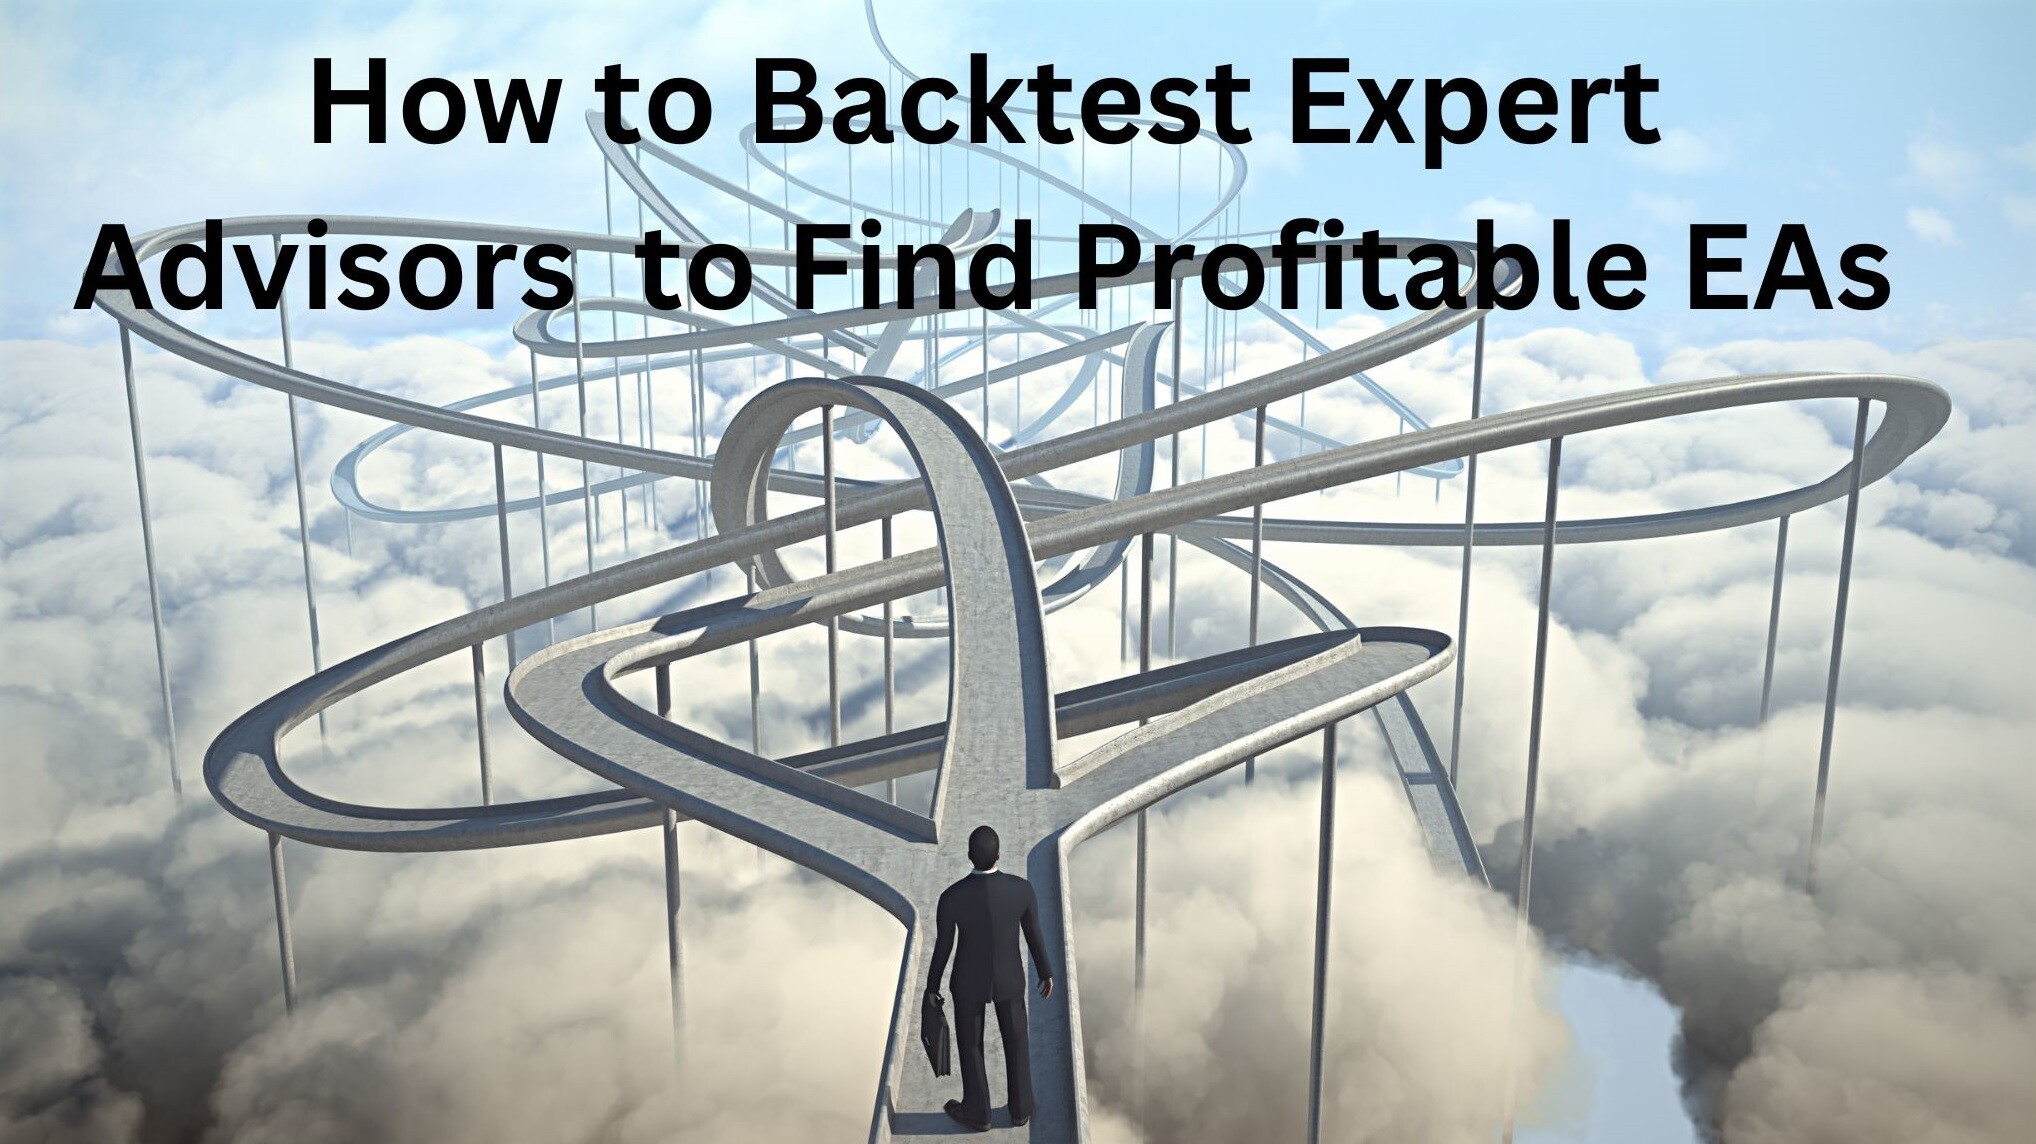 How to Backtest Expert Advisors to Find Profitable EAs